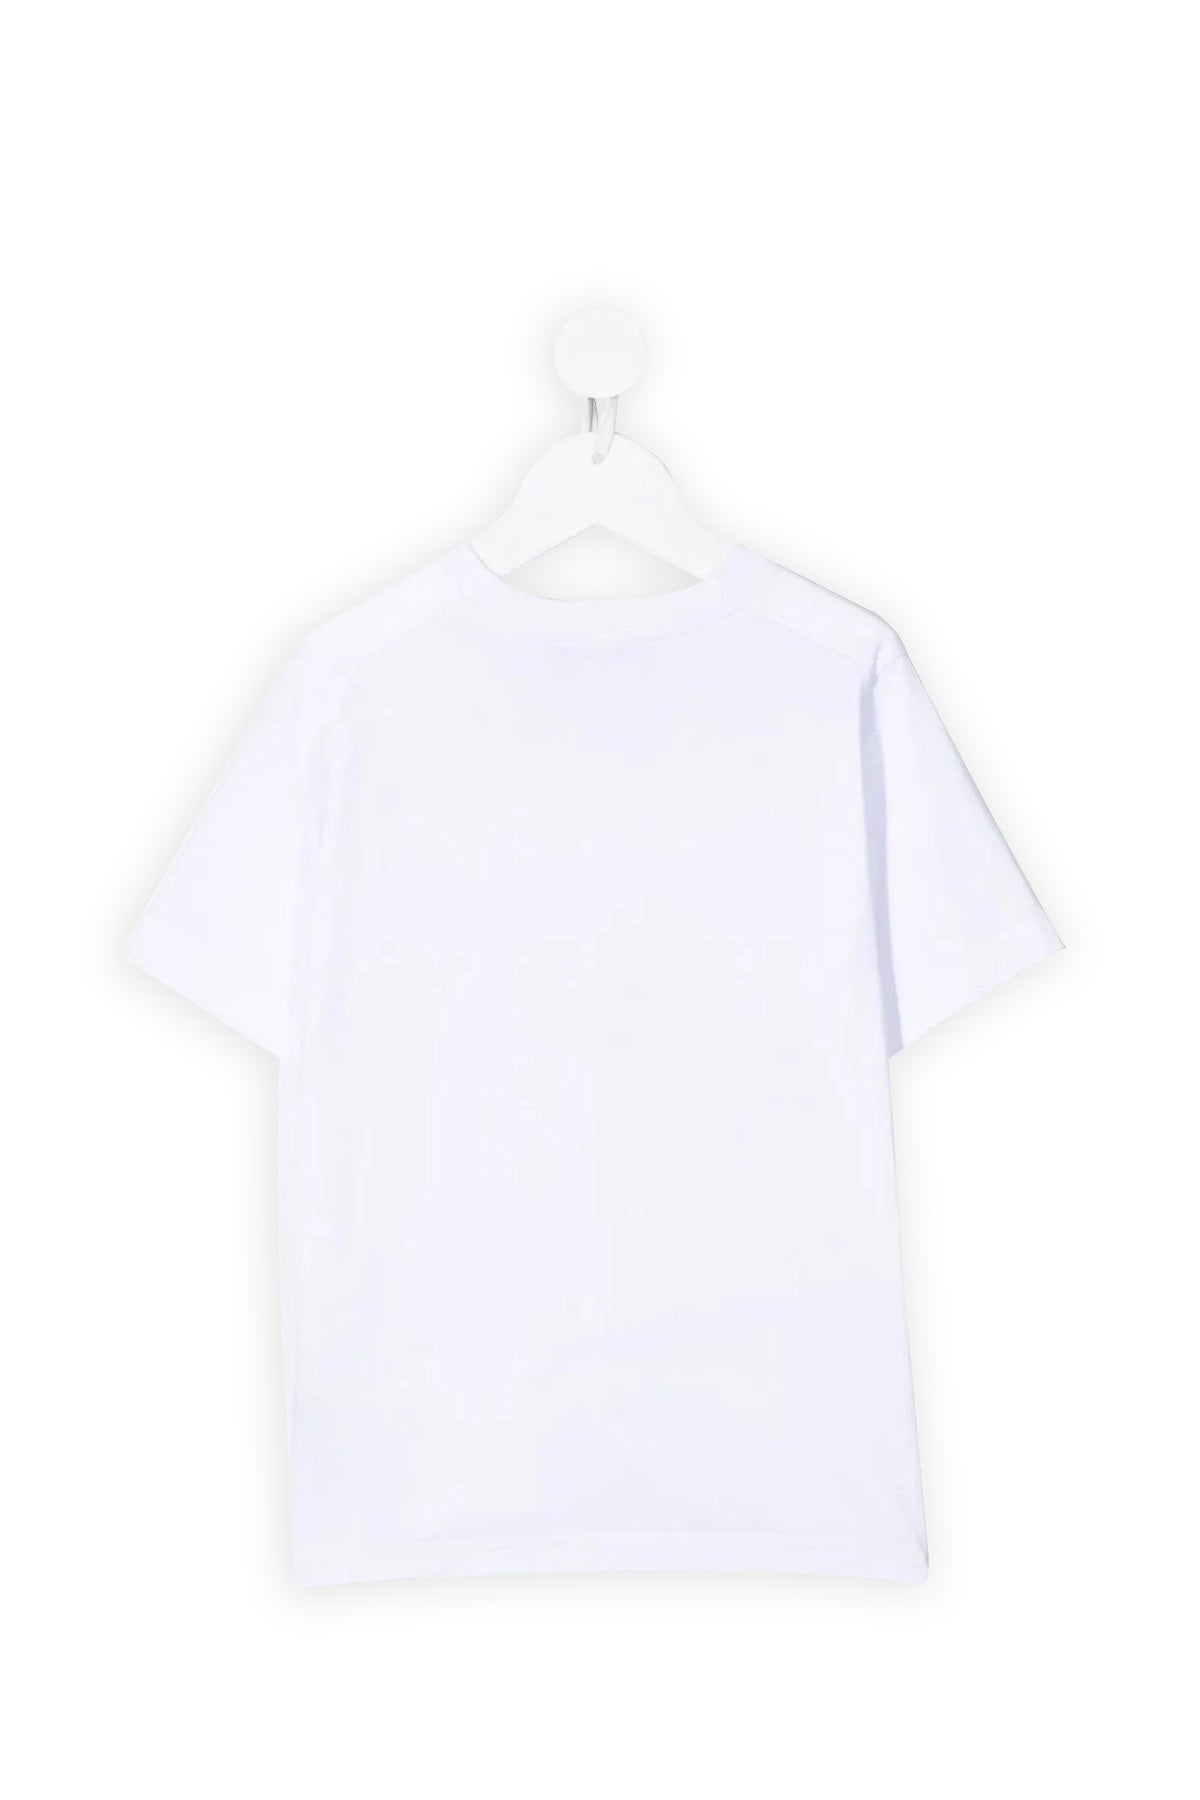 T-Shirt Stampa Frontale Bianco